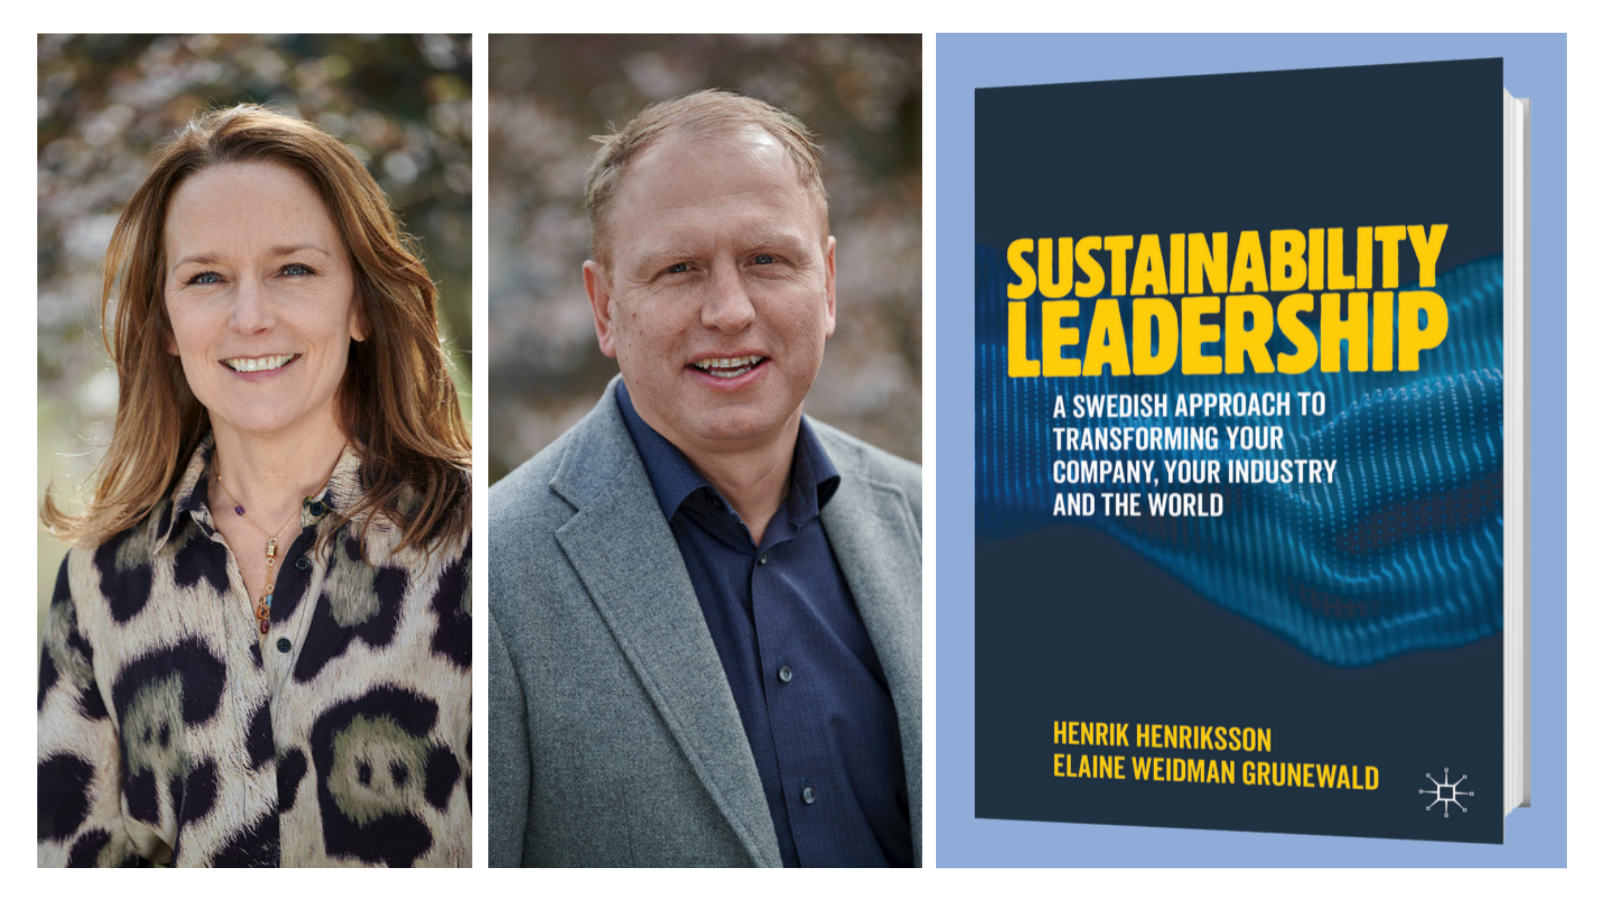 Scania President & CEO Henrik Henriksson and global sustainability executive Elaine Weidman Grunewald recently published Sustainability Leadership: A Swedish Approach to Transforming Your Company